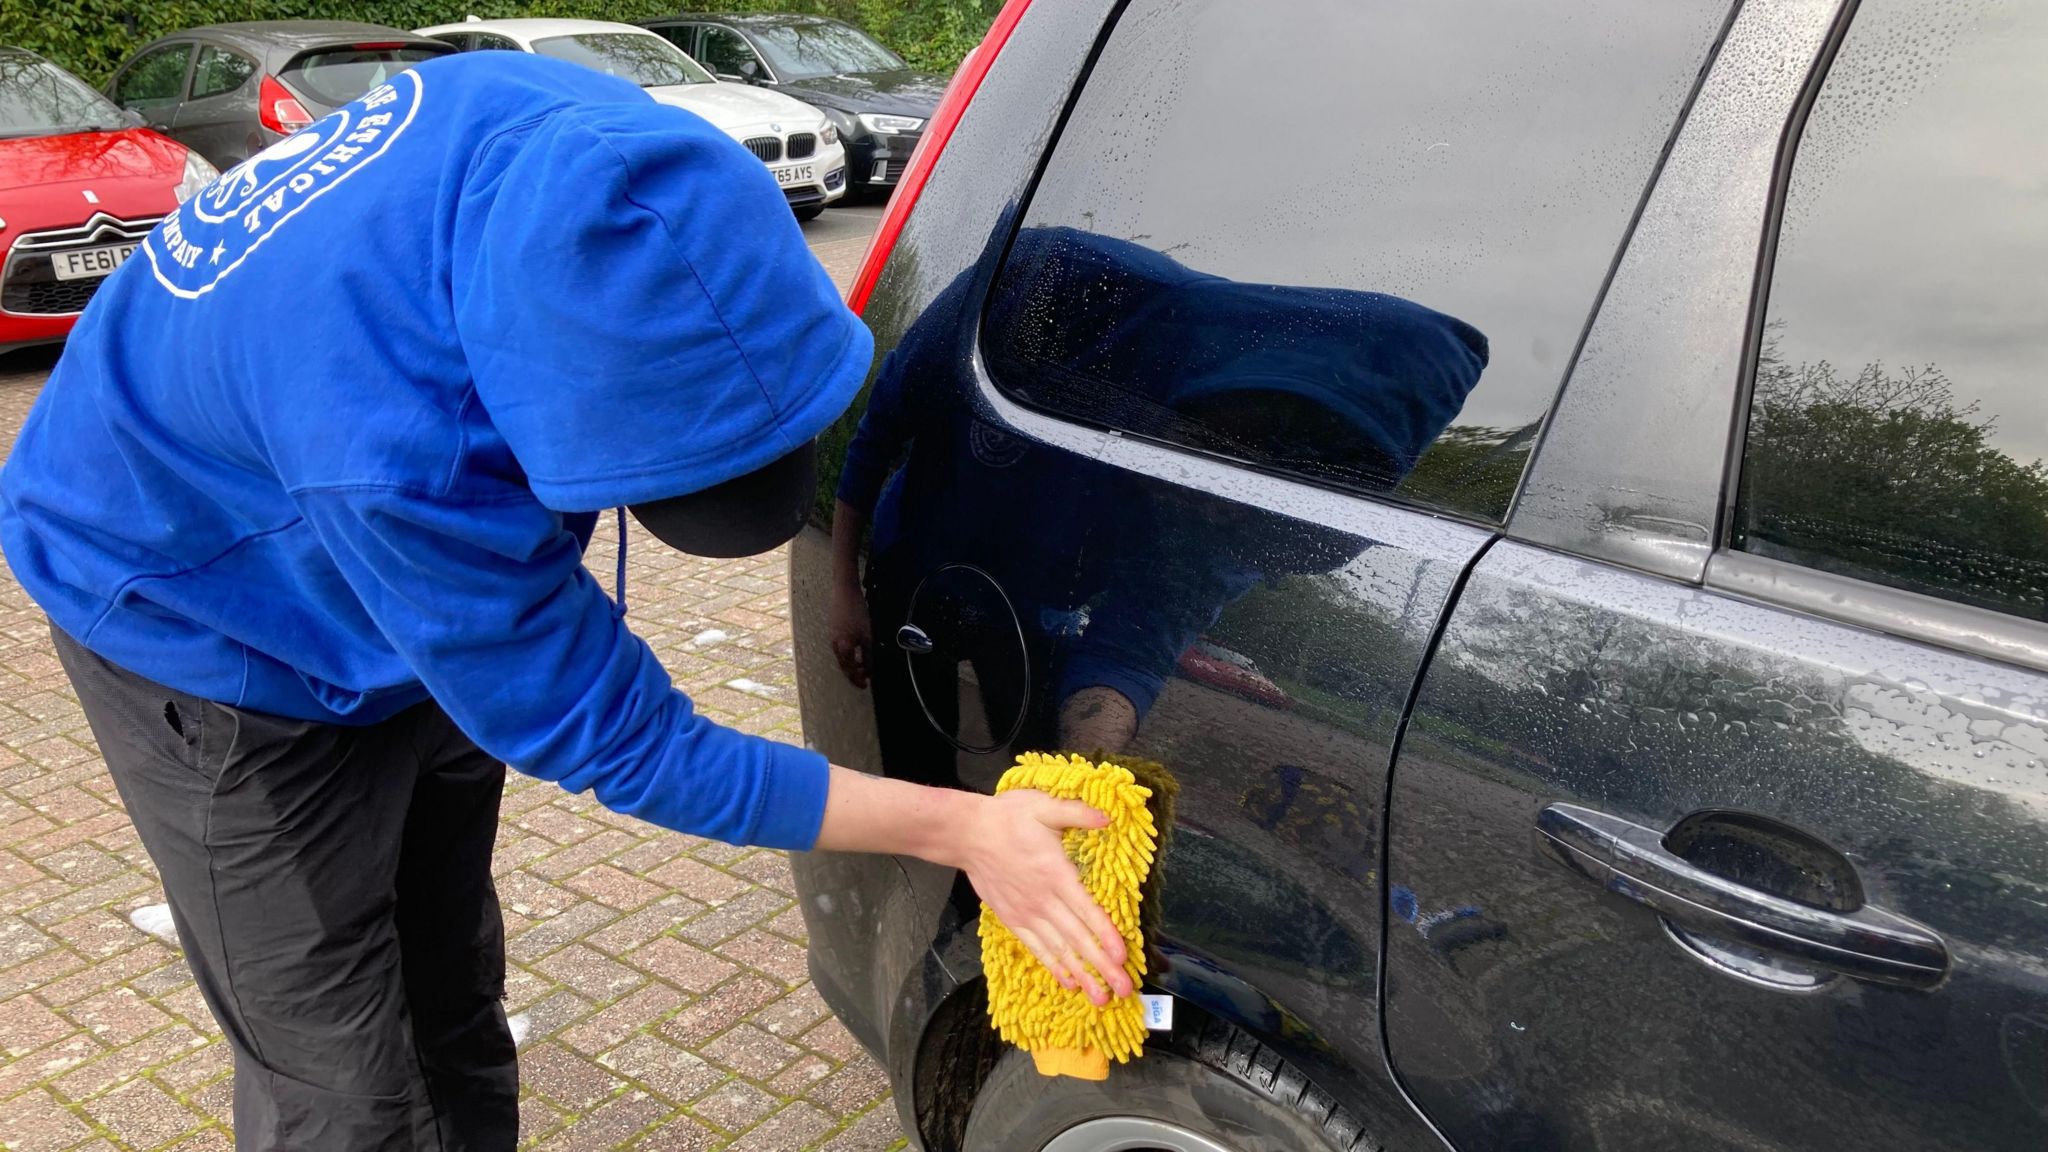 A man in a blue hoodie washing the back of a dirty car